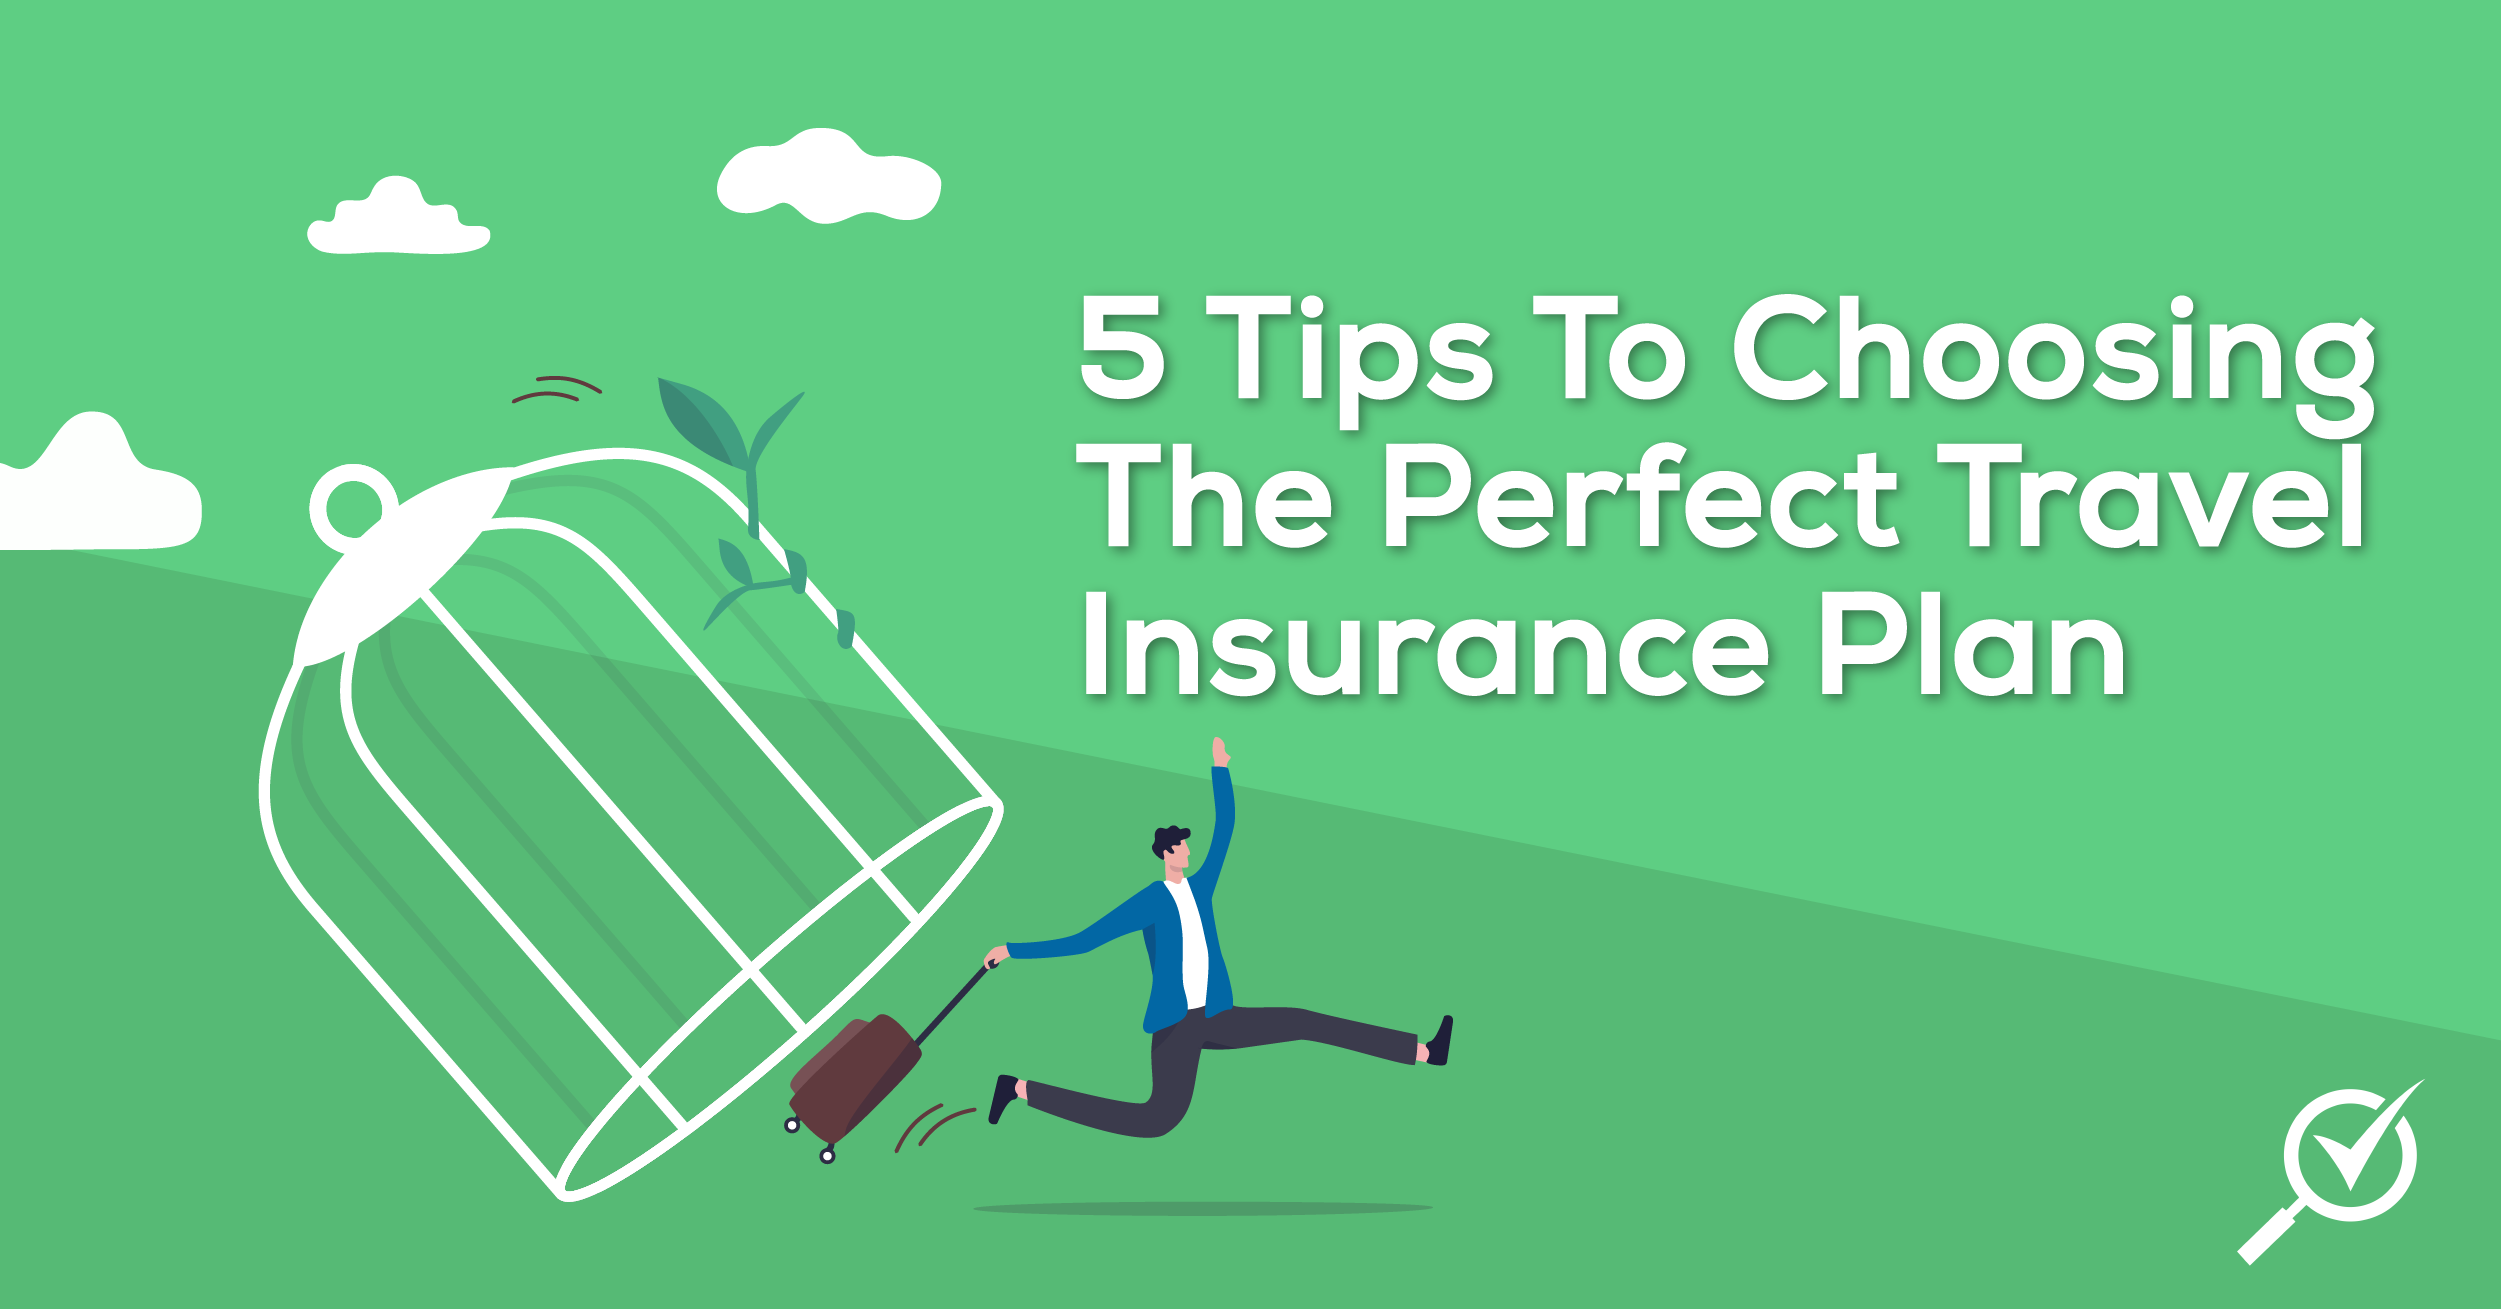 5 Tips To Choosing The Perfect Travel Insurance Plan